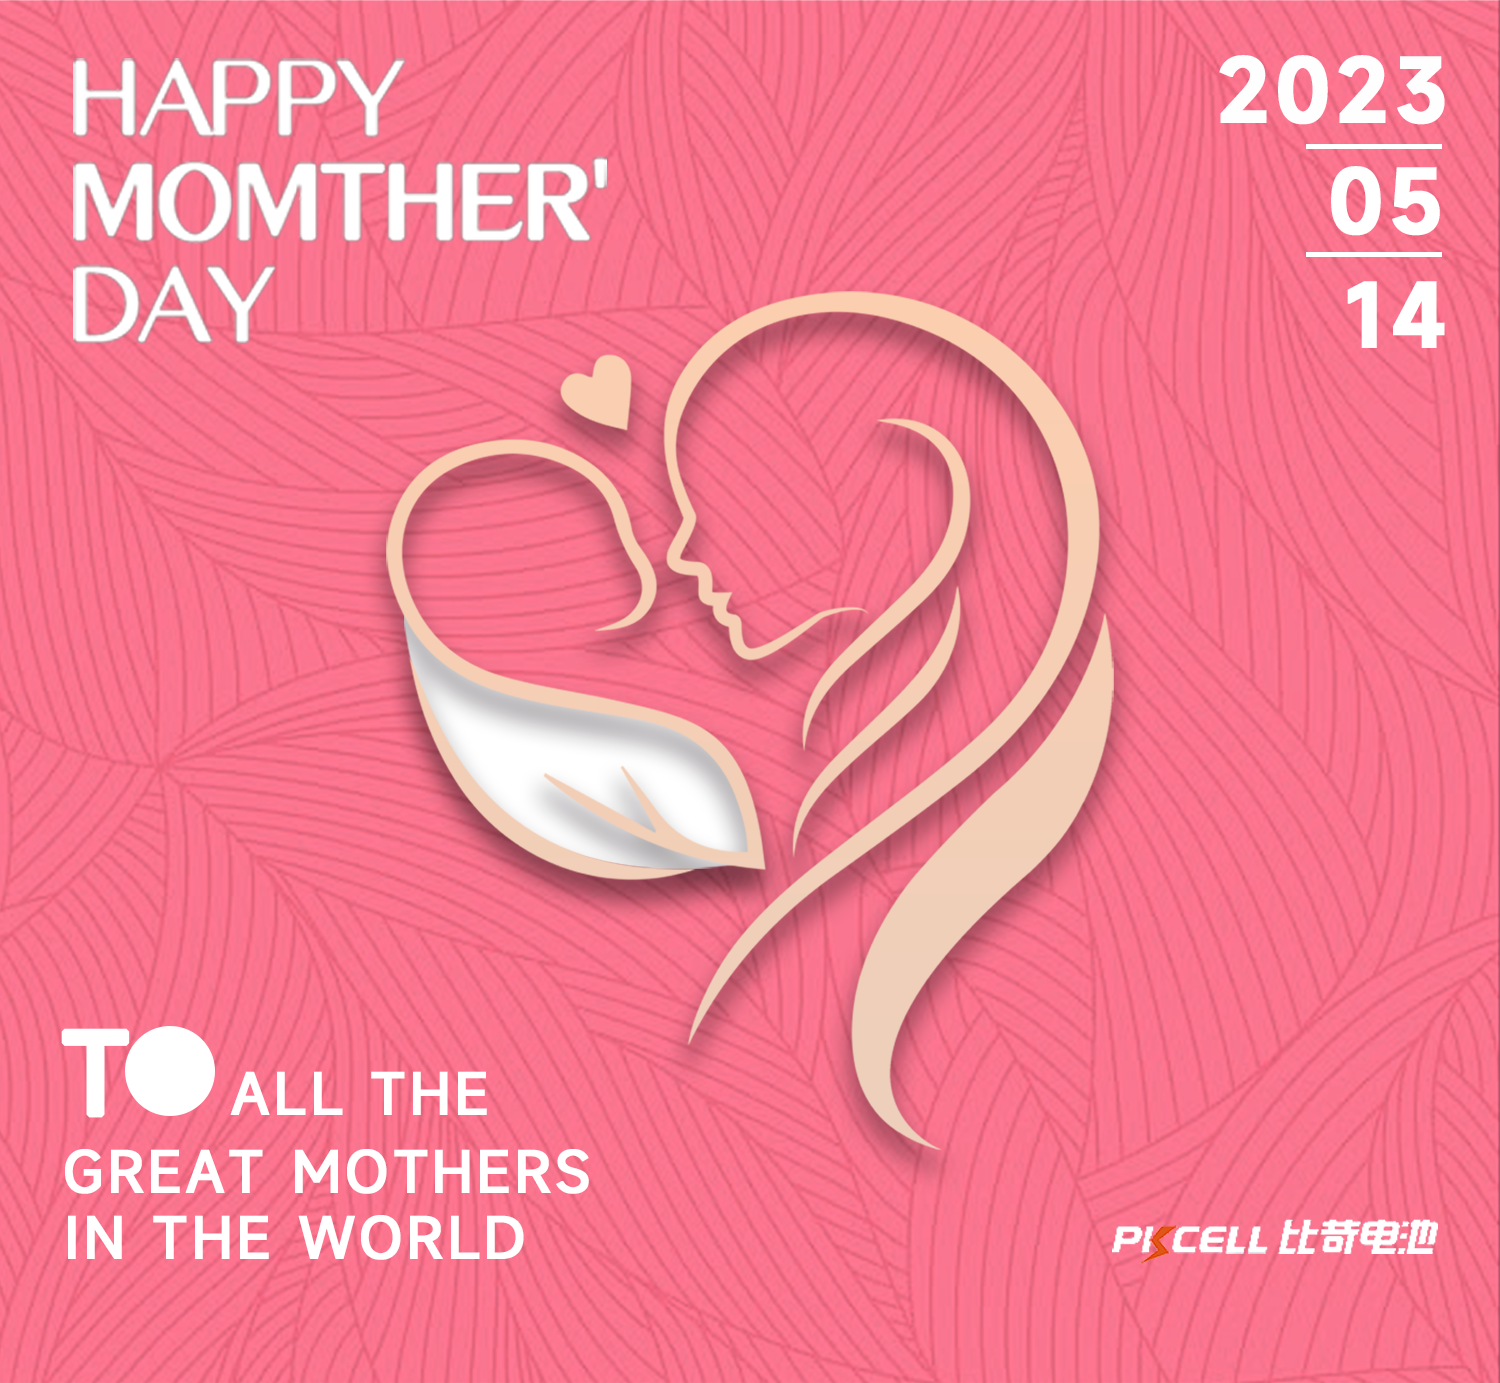 Do you know the customs of various countries on Mother’s Day?